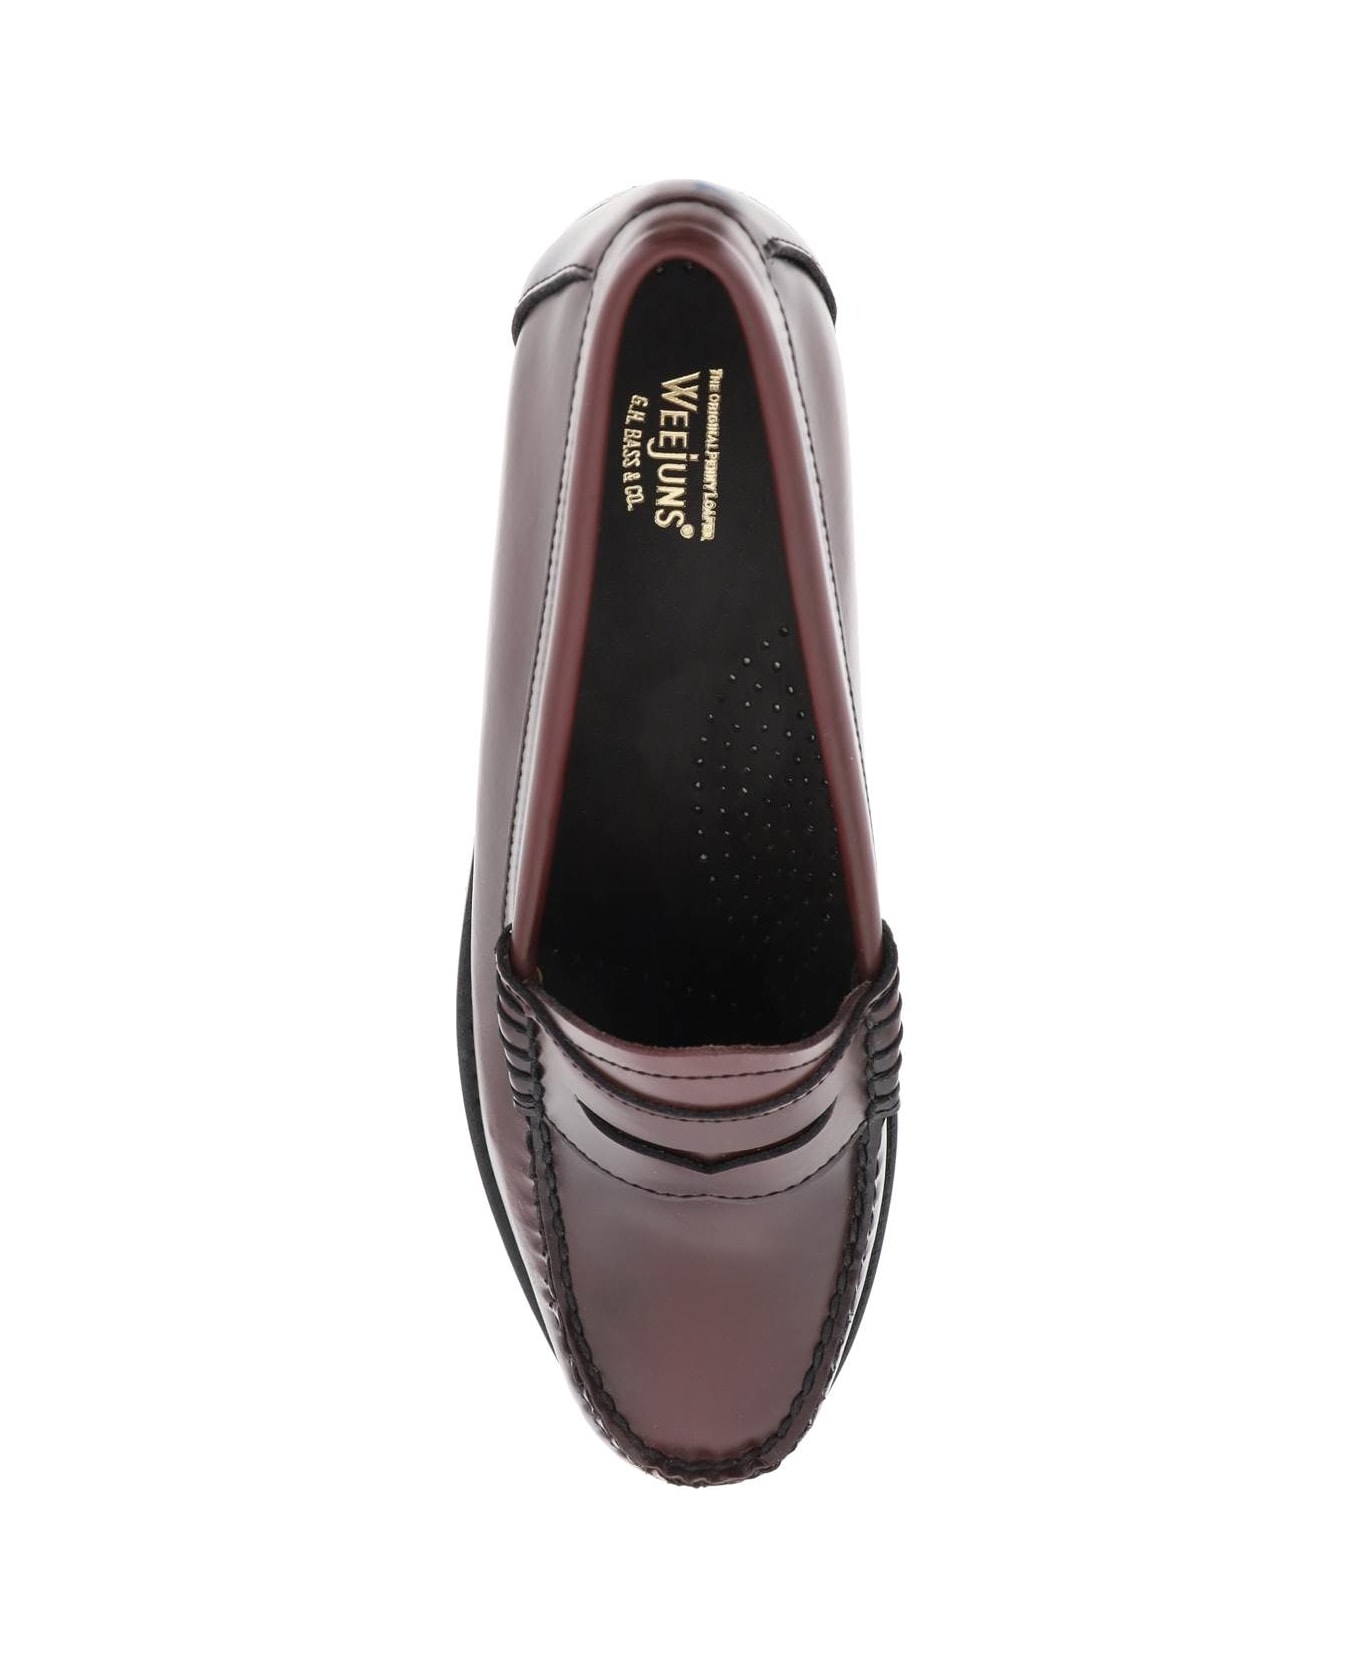 G.H.Bass & Co. 'weejuns' Penny Loafers - WINE (Red)